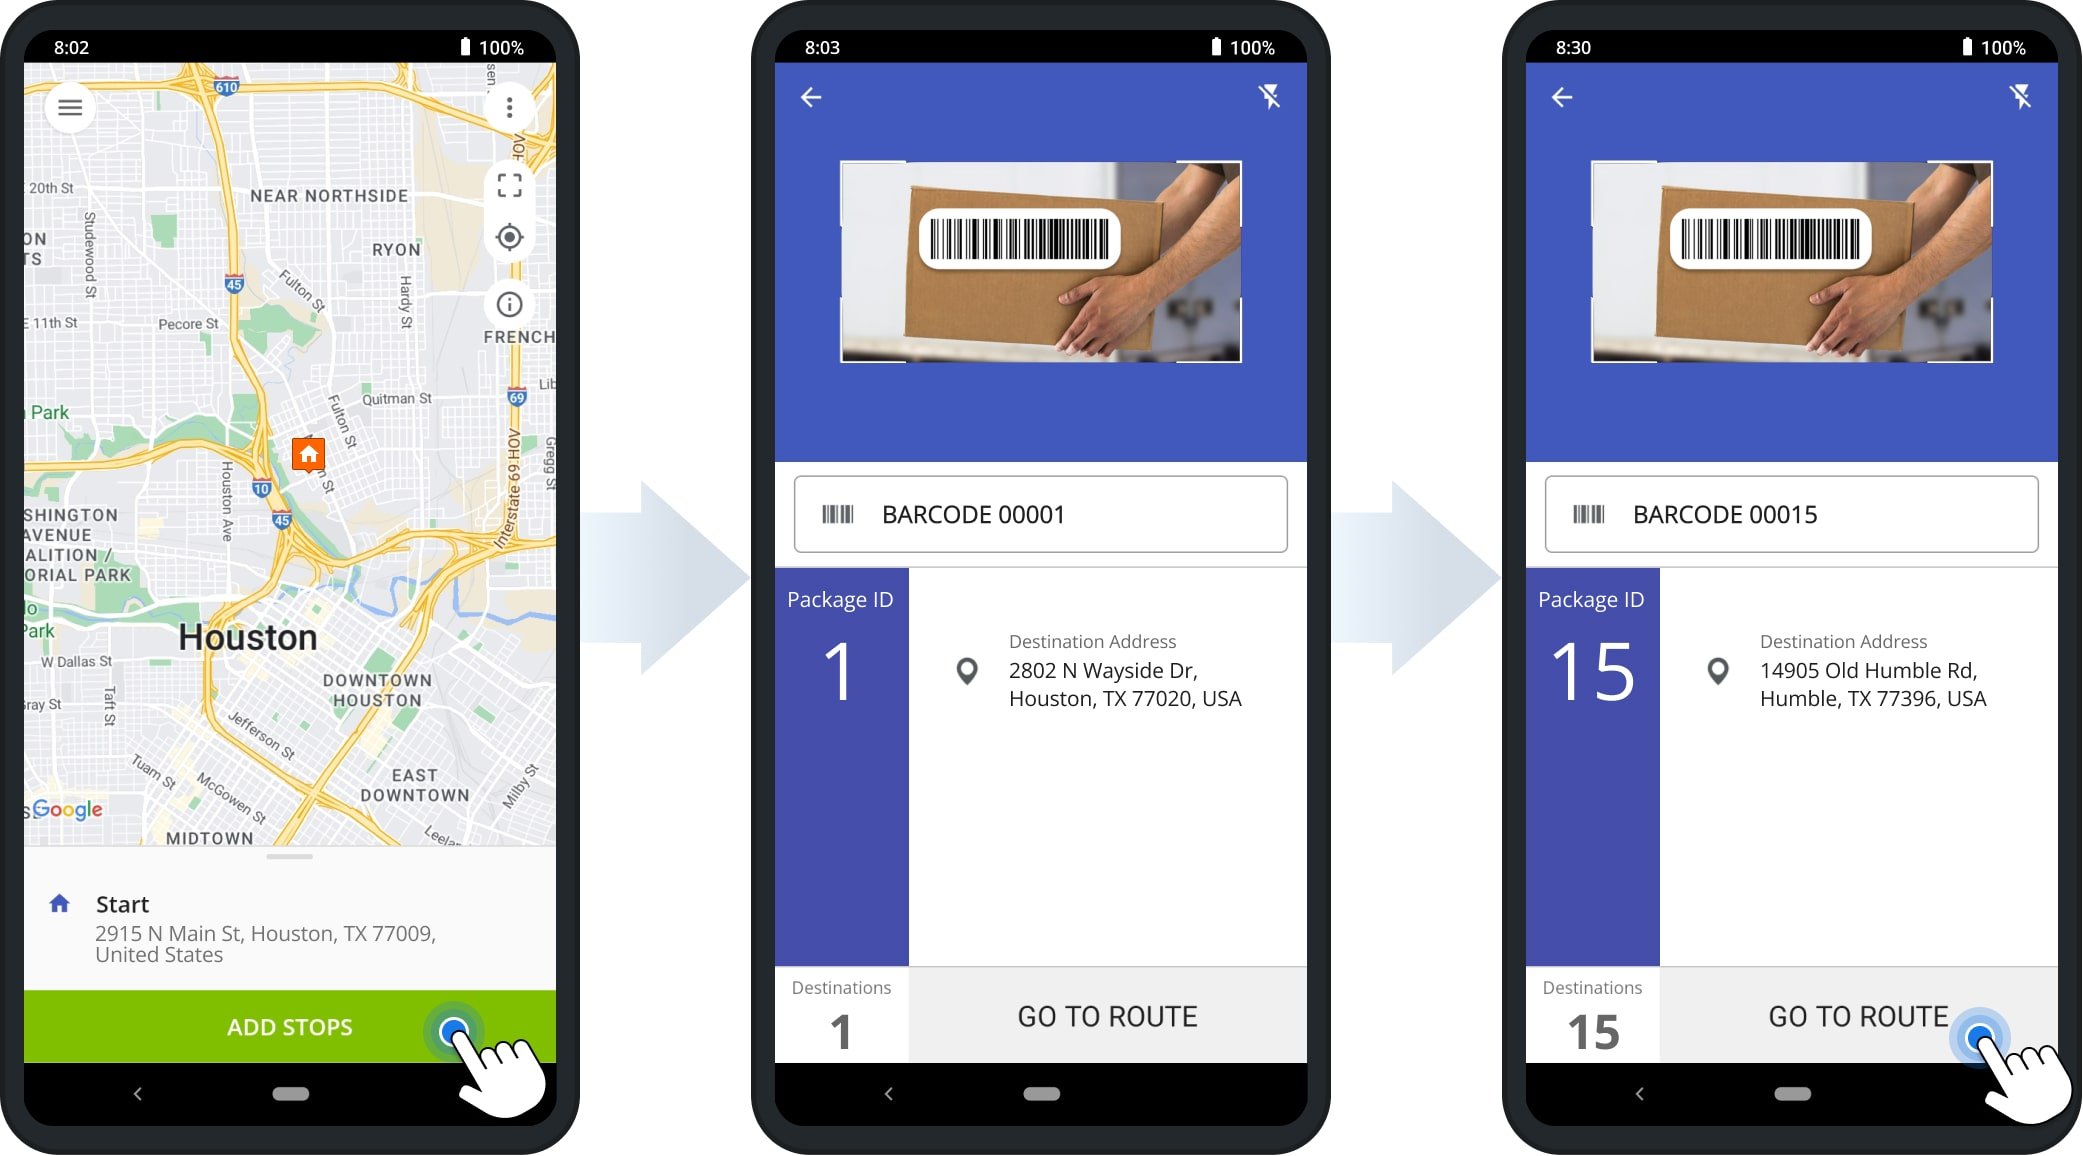 Using Route4Me's route barcode scanner to scan barcodes on packages and add stop addresses to the delivery route.